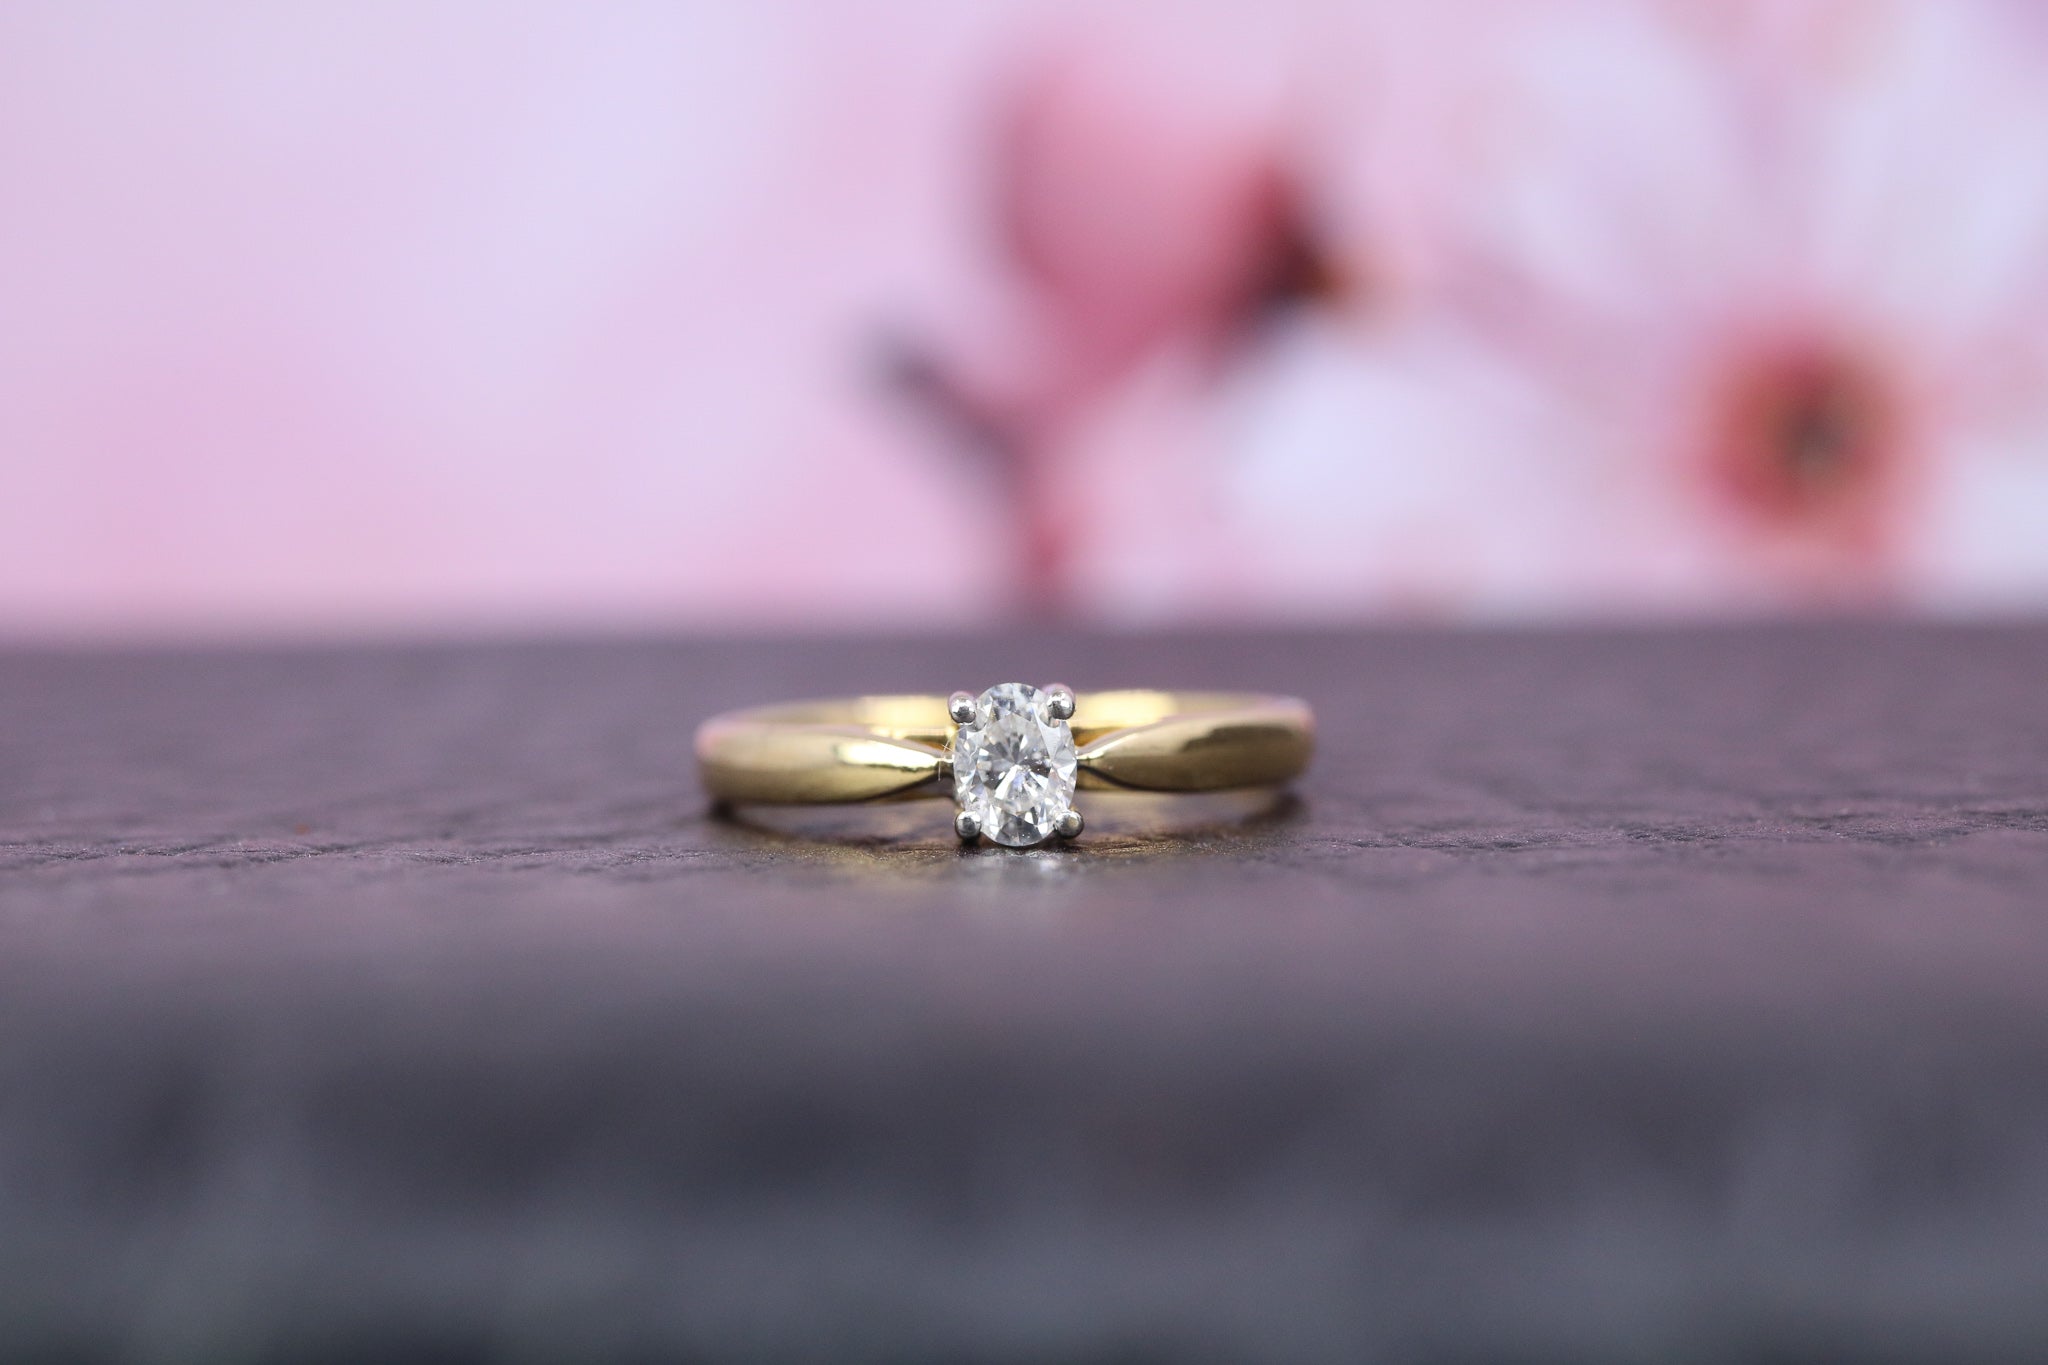 18ct Yellow Gold & Diamond Ring - W6045 - Hallmark Jewellers Formby & The Jewellers Bench Widnes